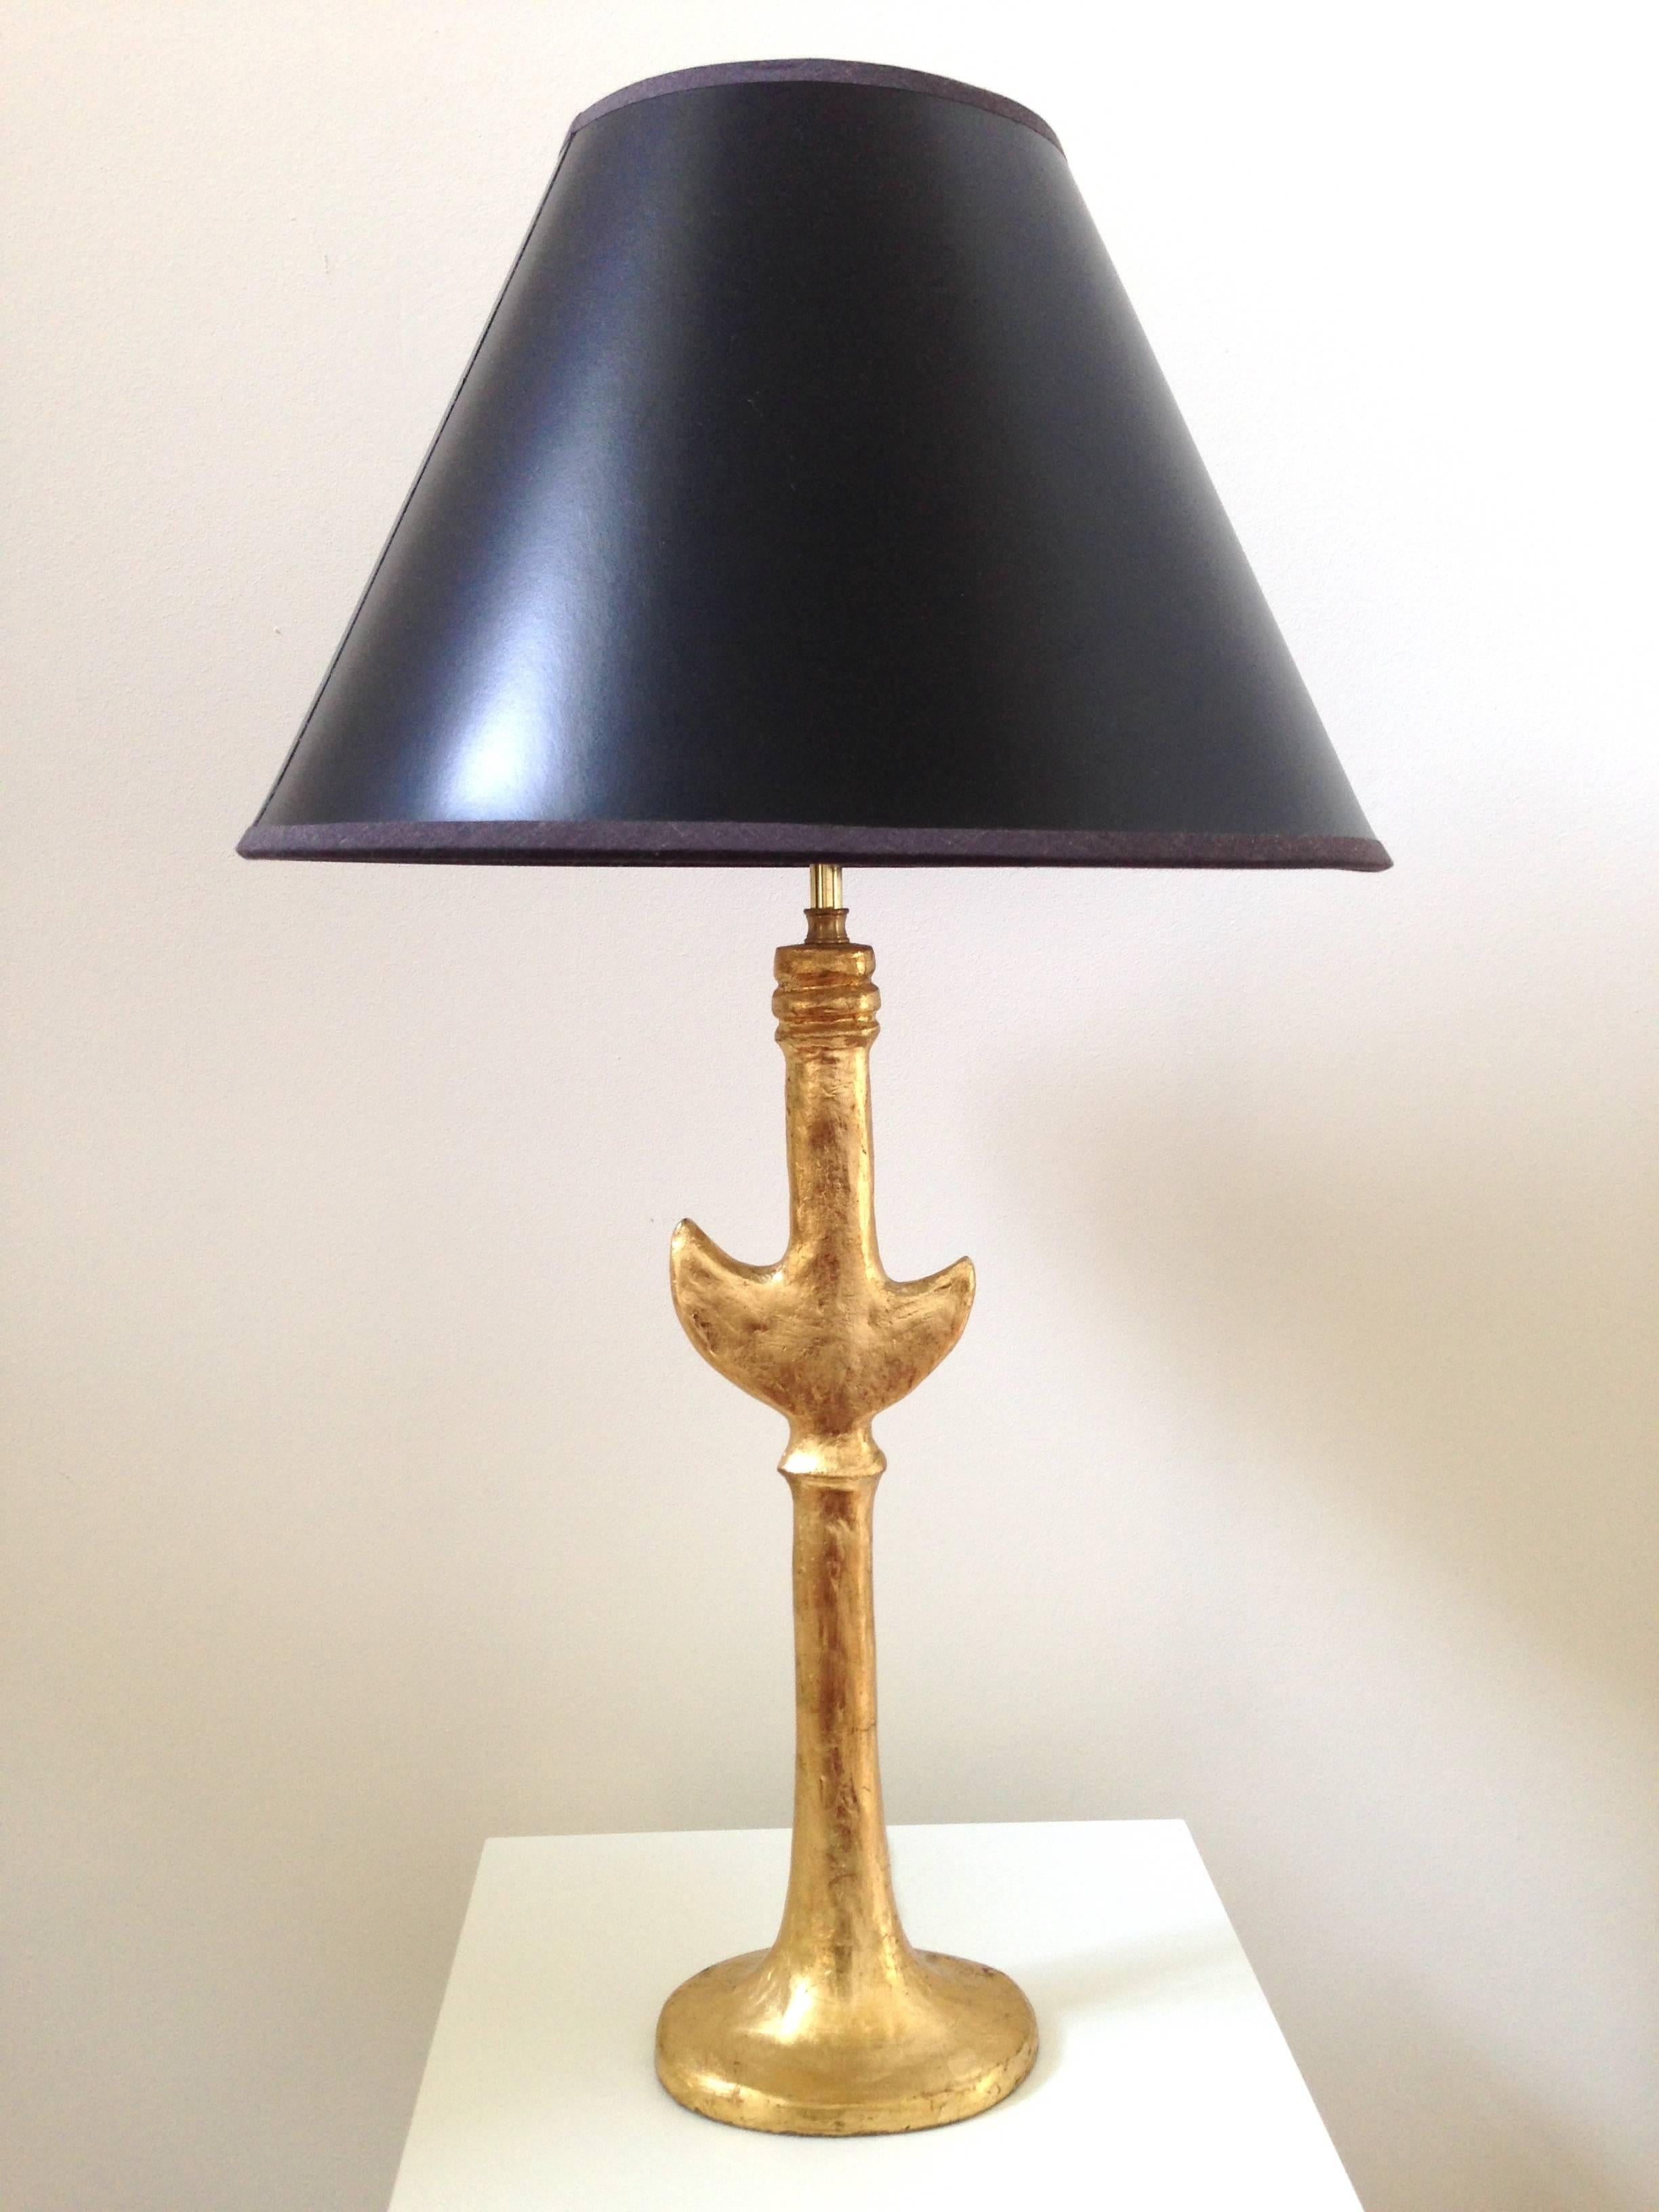 In the style of Giacometti's plaster lamps, this pair of lamps possibly by Sirmos have a gold leaf finish to them. A very attractive and stylistic pair, these lamps actually have a slight height difference although with shades you can't really tell.